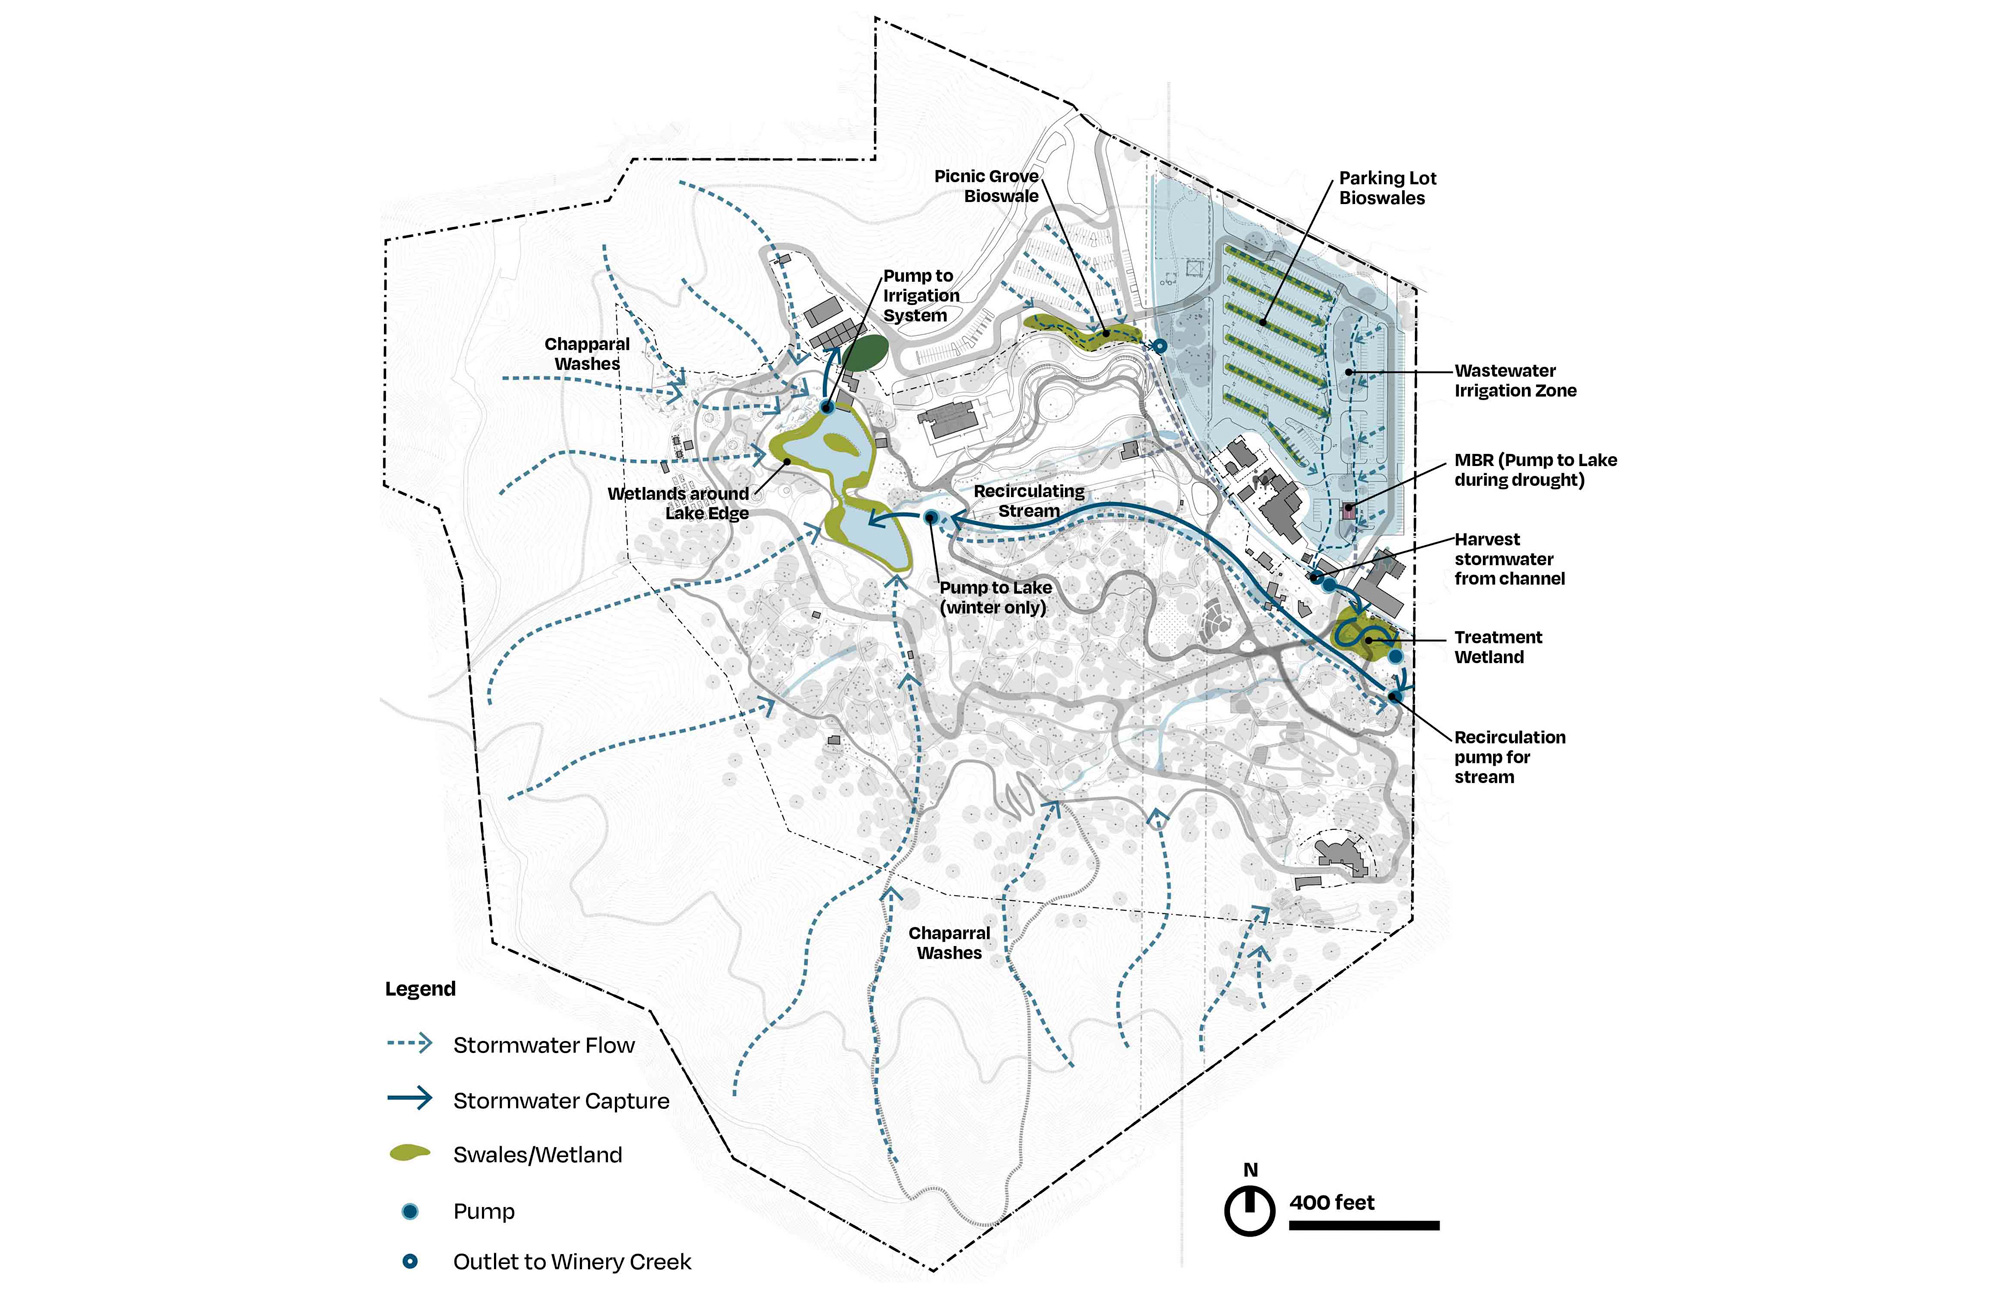 Descanso Gardens water site plan showing the stormwater flow, capture, wetlands, and outlet to Winery Creek